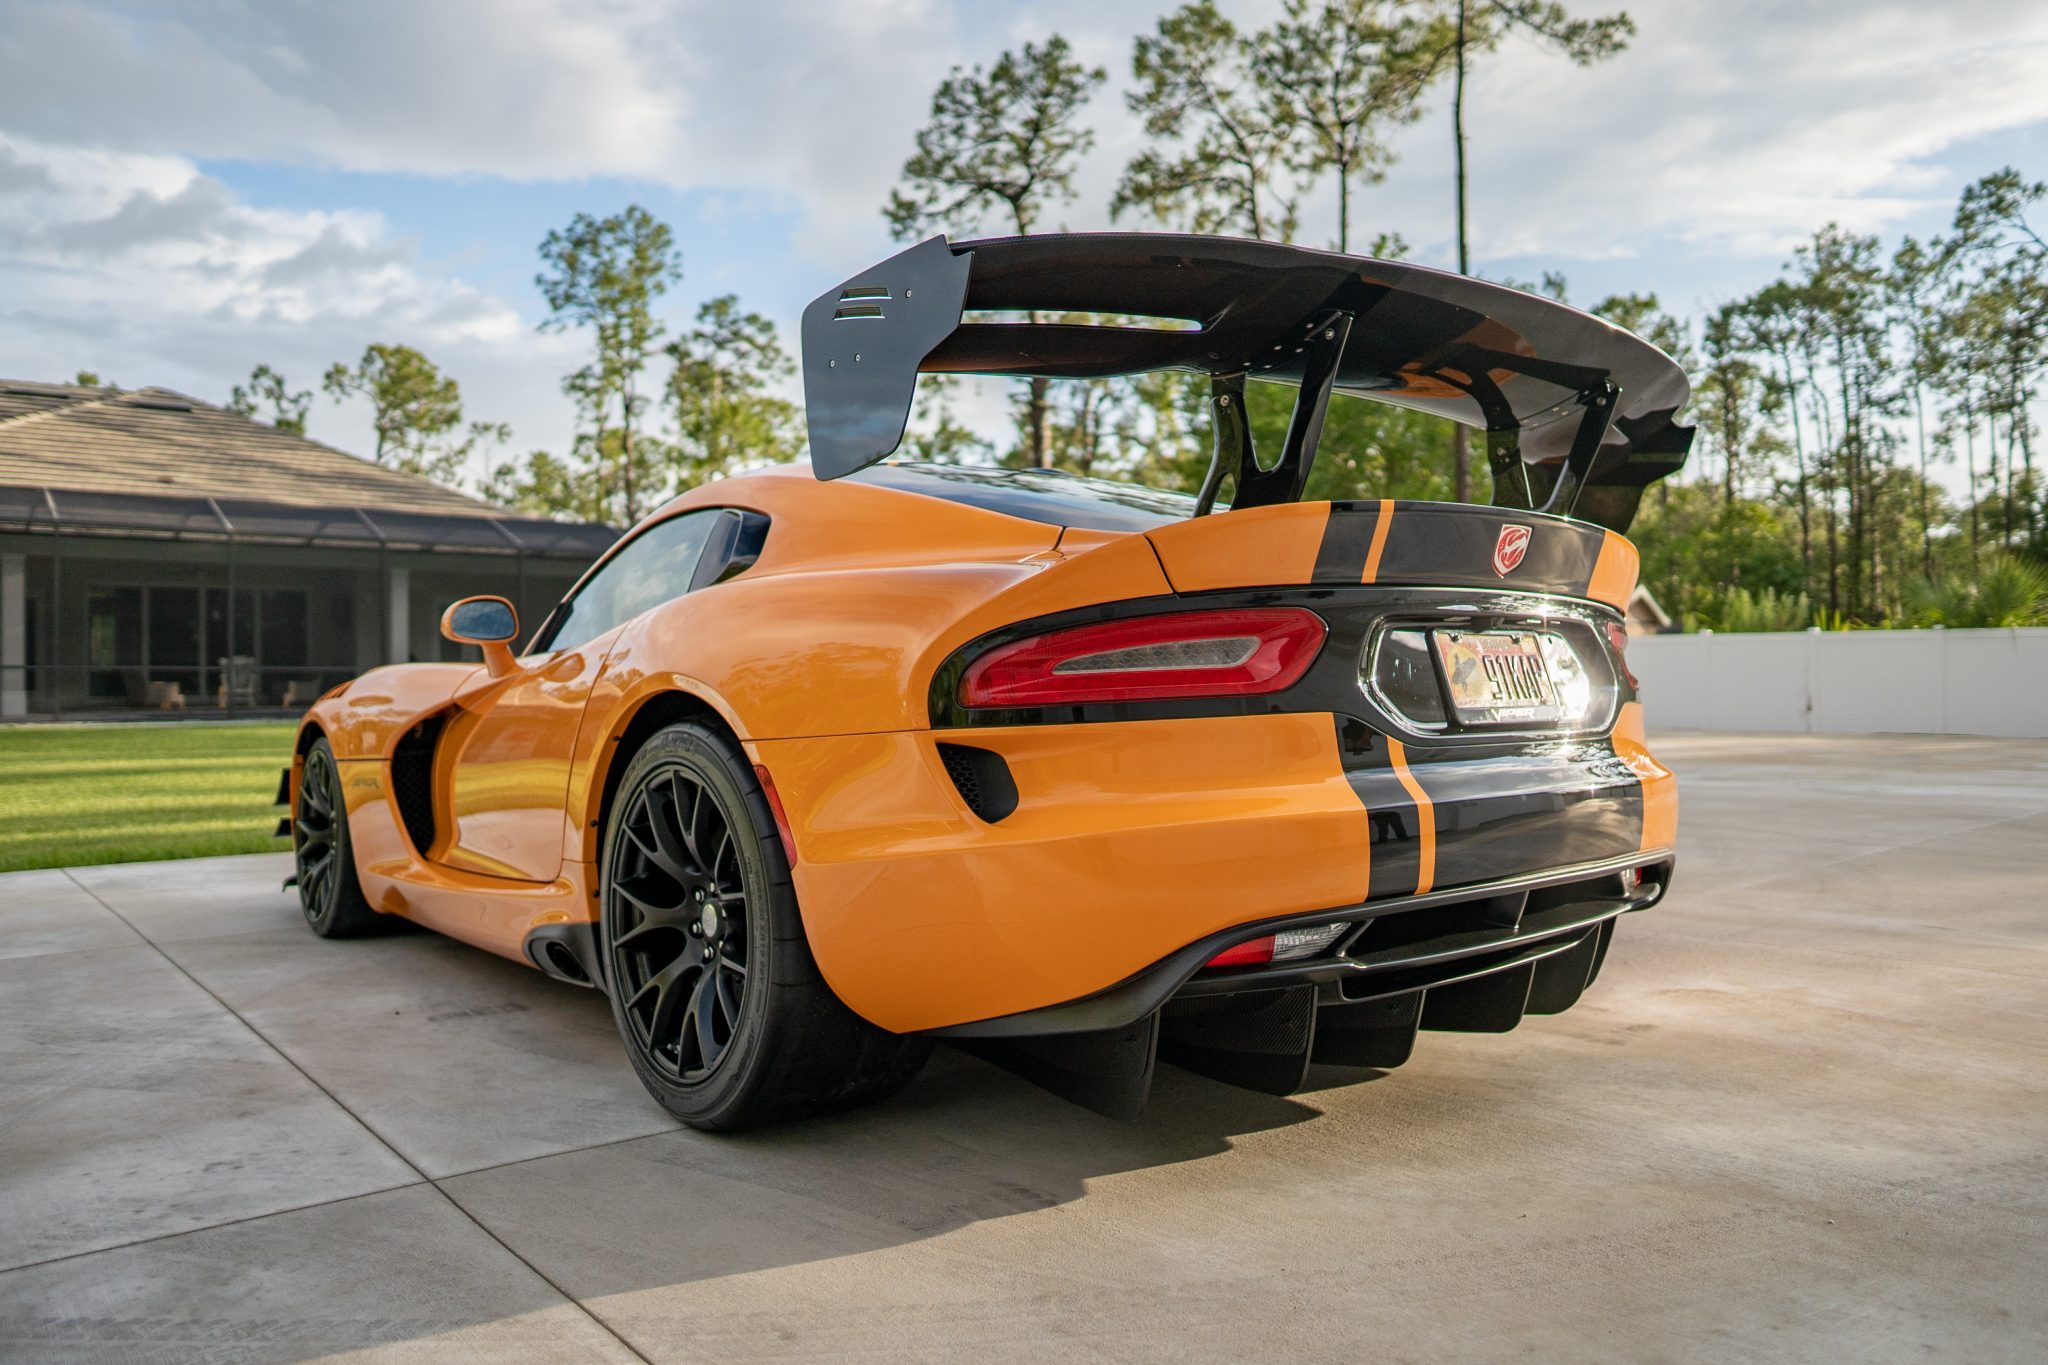 Dominate Your Local Track Day With This 17 Dodge Viper Acr Extreme Carscoops